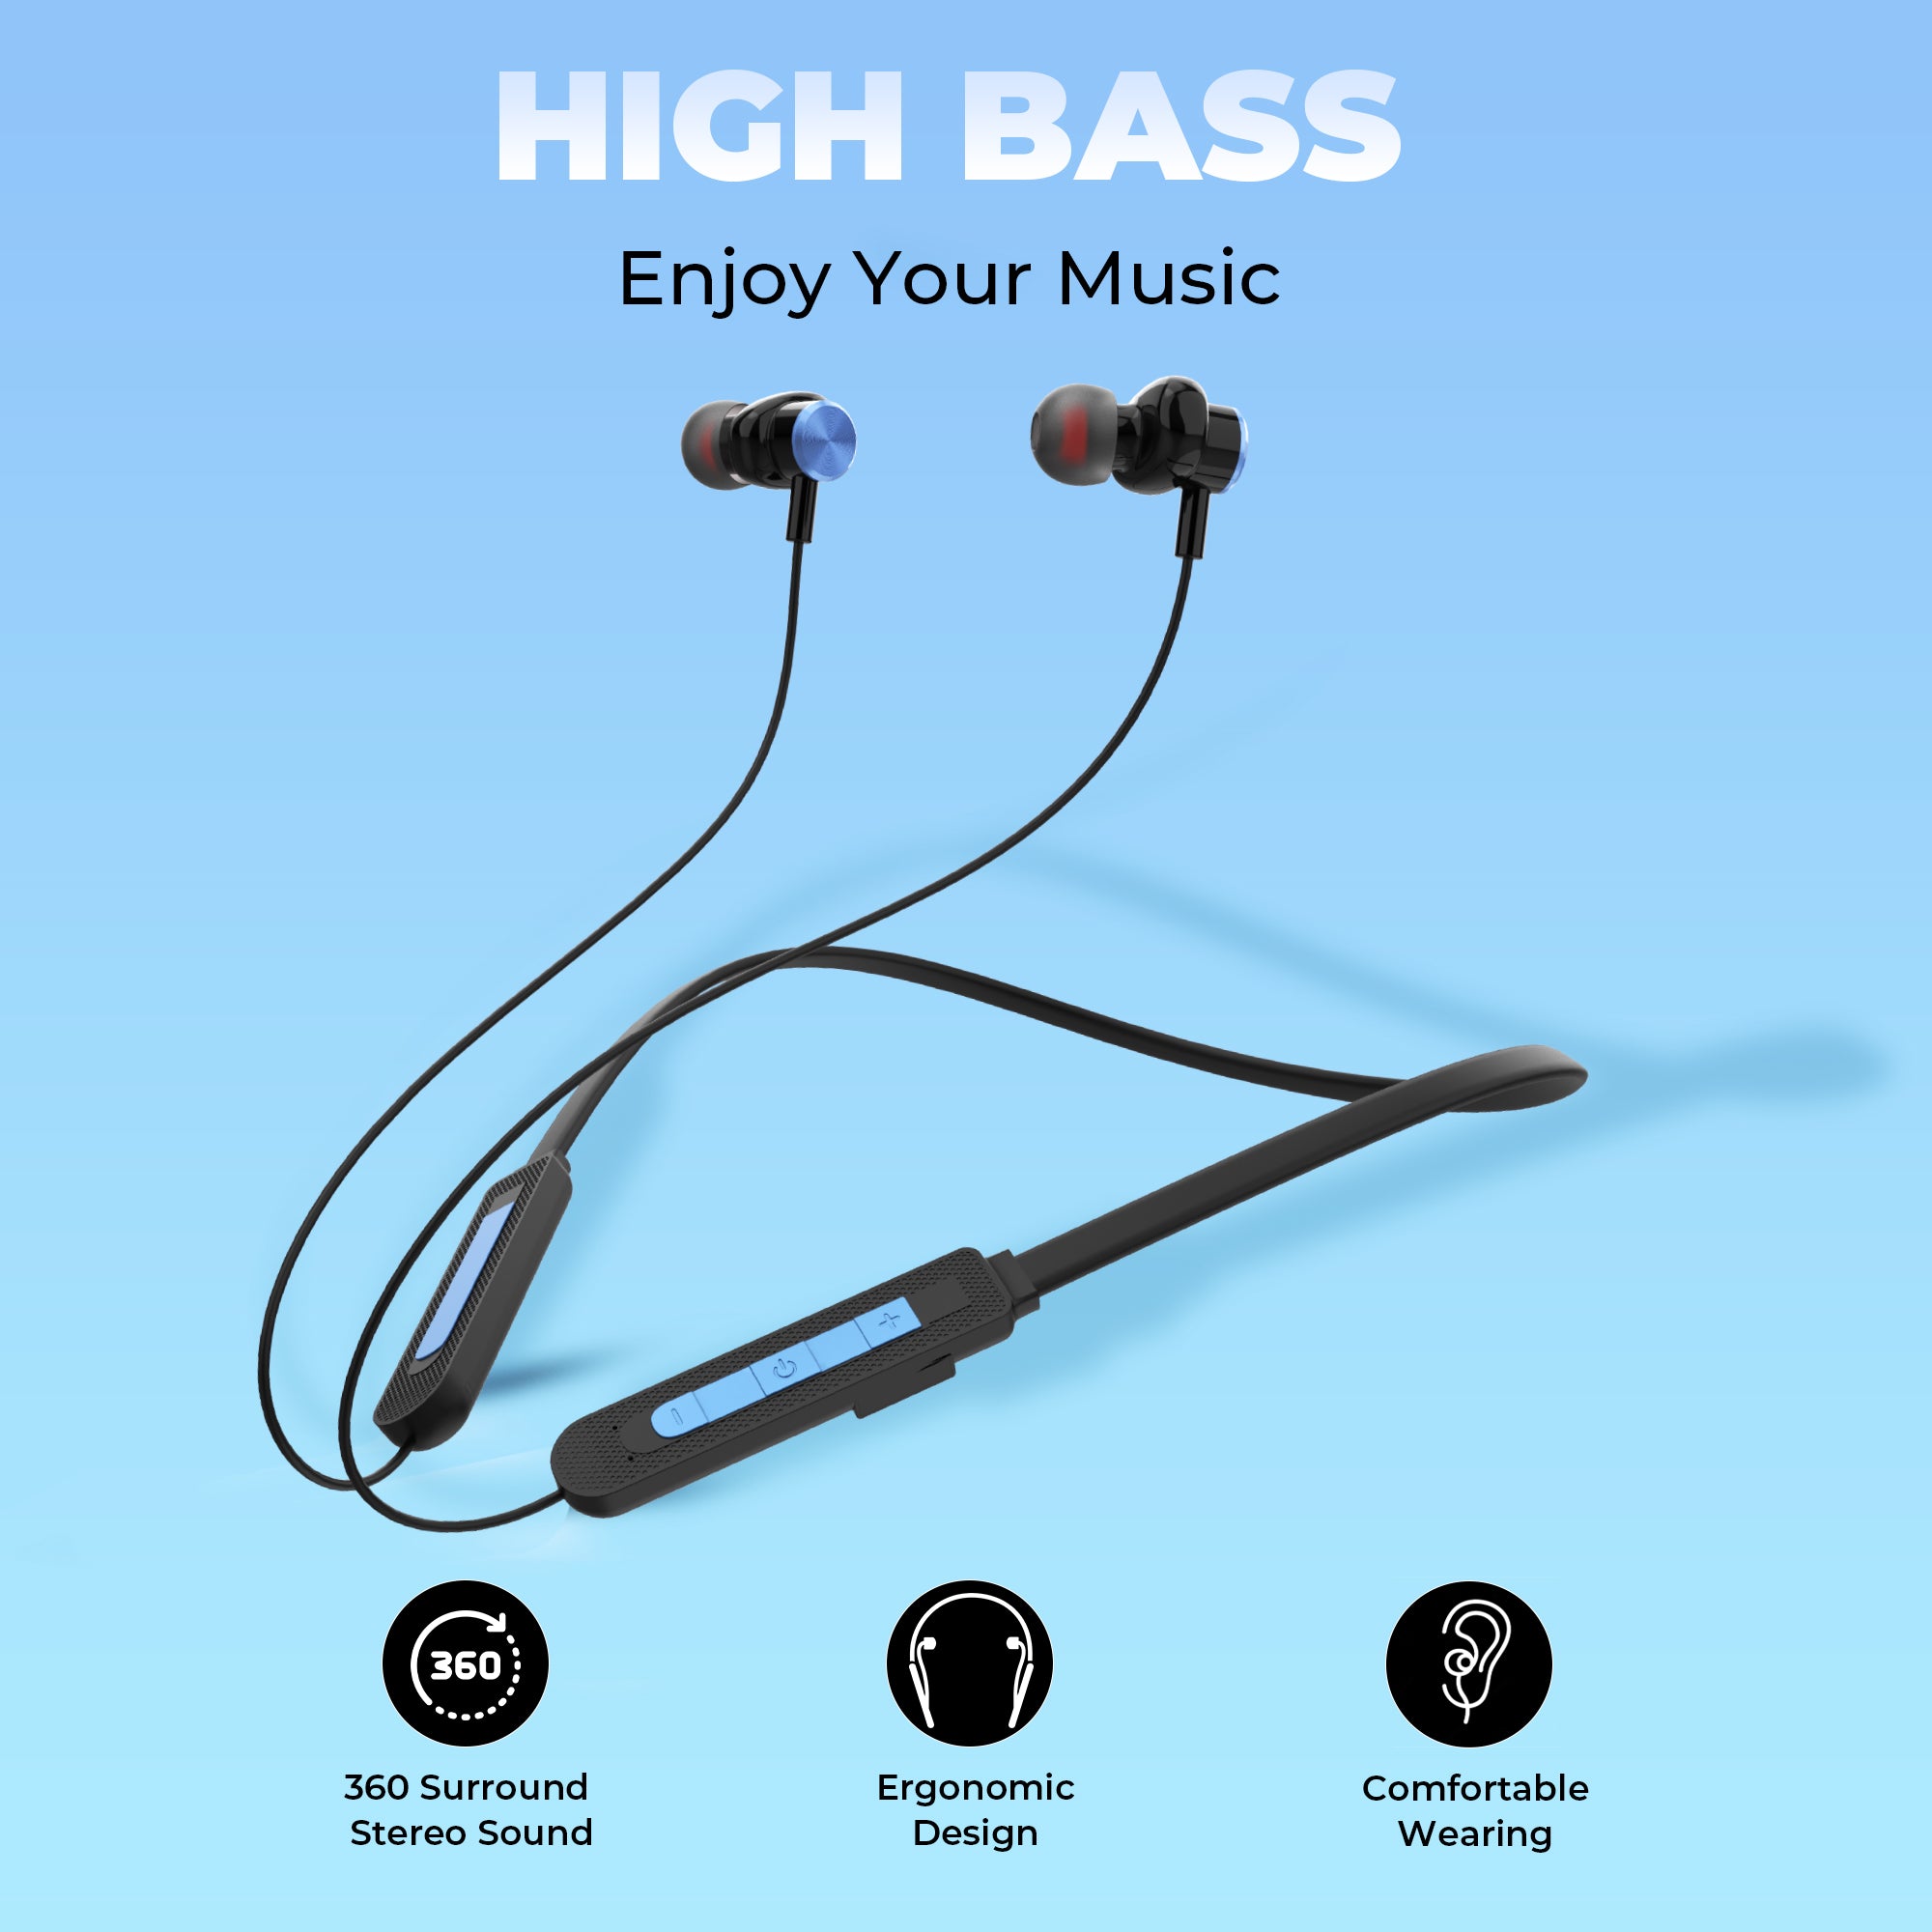 GIZMORE MN218 Melody Bluetooth Wireless 5.0 in Ear Neckband Earphone with mic, Up to 18 HRS Playtime, Dual Pairing, Hi-Fi Stereo Sound, Multiple Controls, and Lightweight